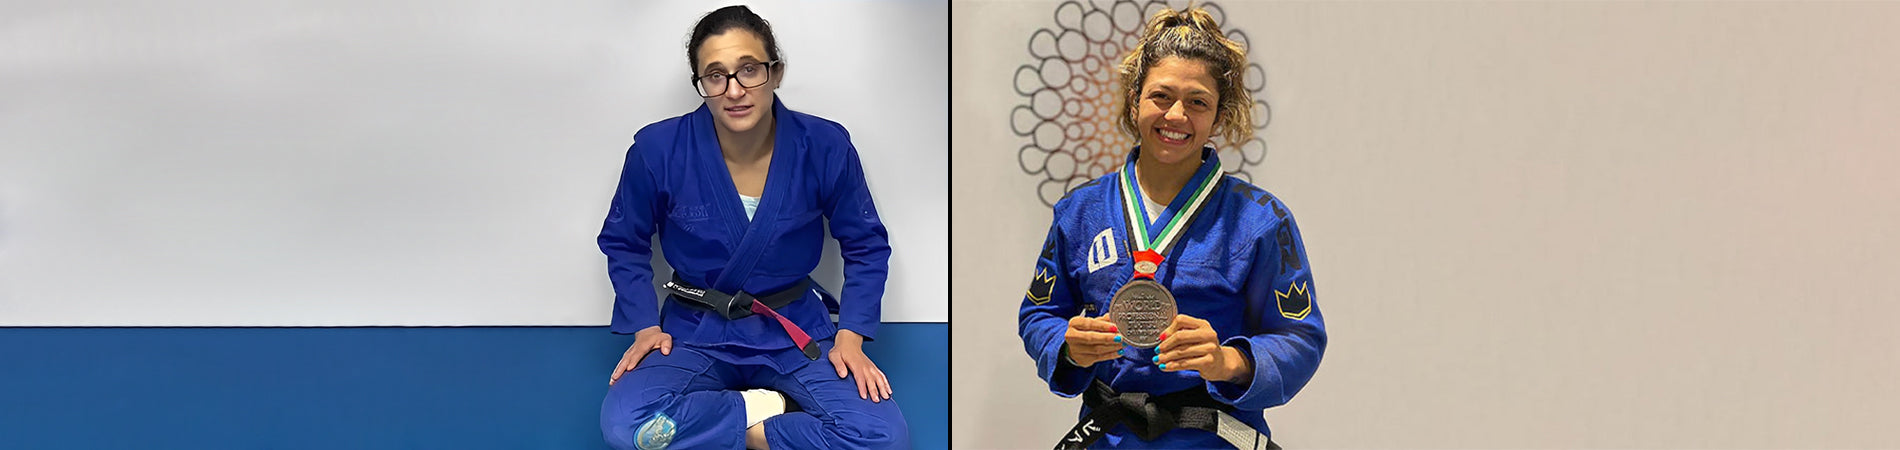 Bianca Basilio is Set to Face BJJ Champion Tammi Musumeci at ONE Fight Night 8